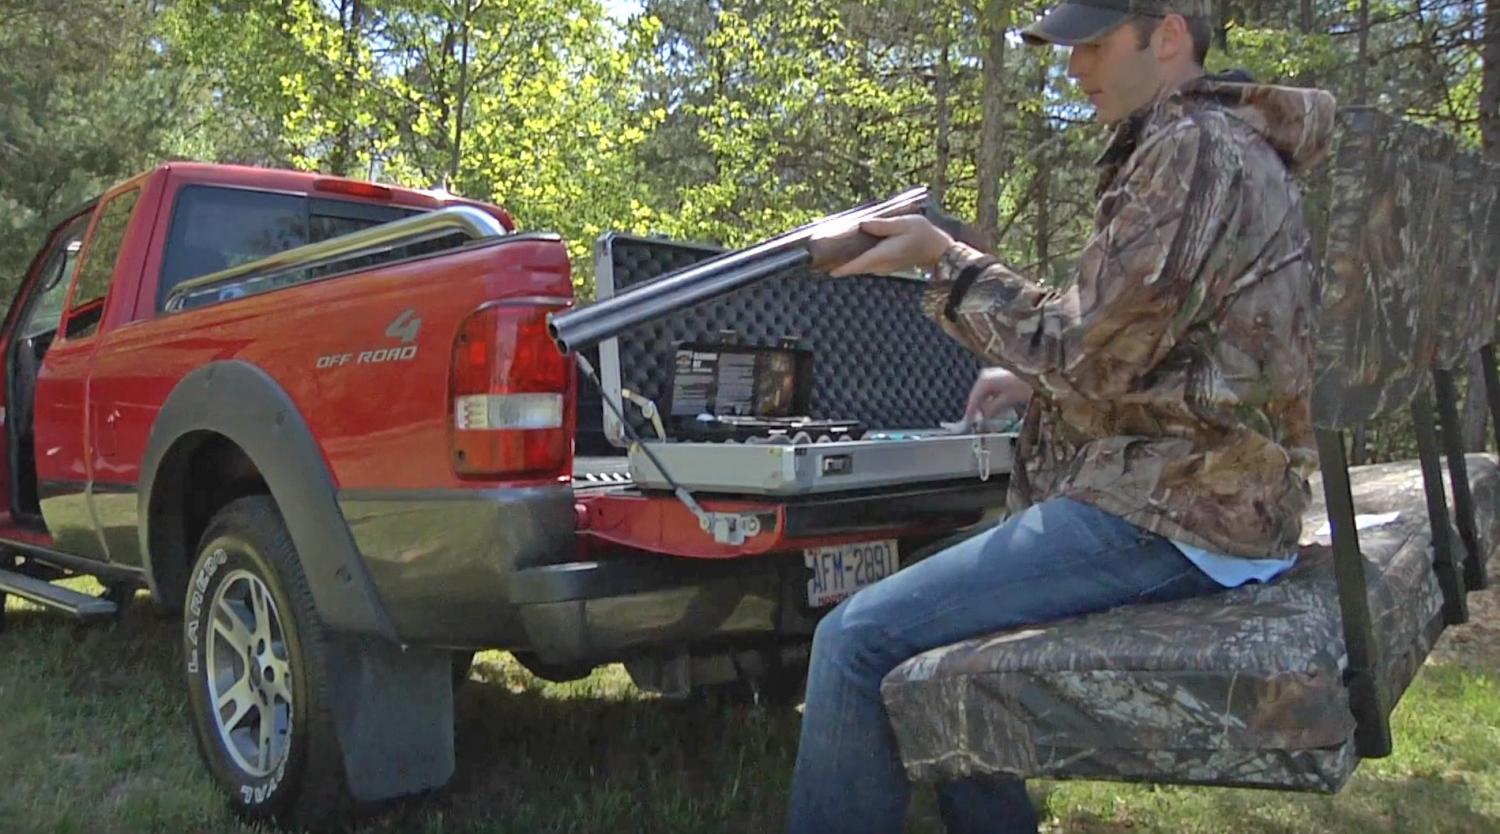 Truck Hitch Cargo Holder Doubles as Seating For Tailgating or Camping - Rivalry Outdoor Portable Cargo Carrier Folding Tailgate Hitch Seat